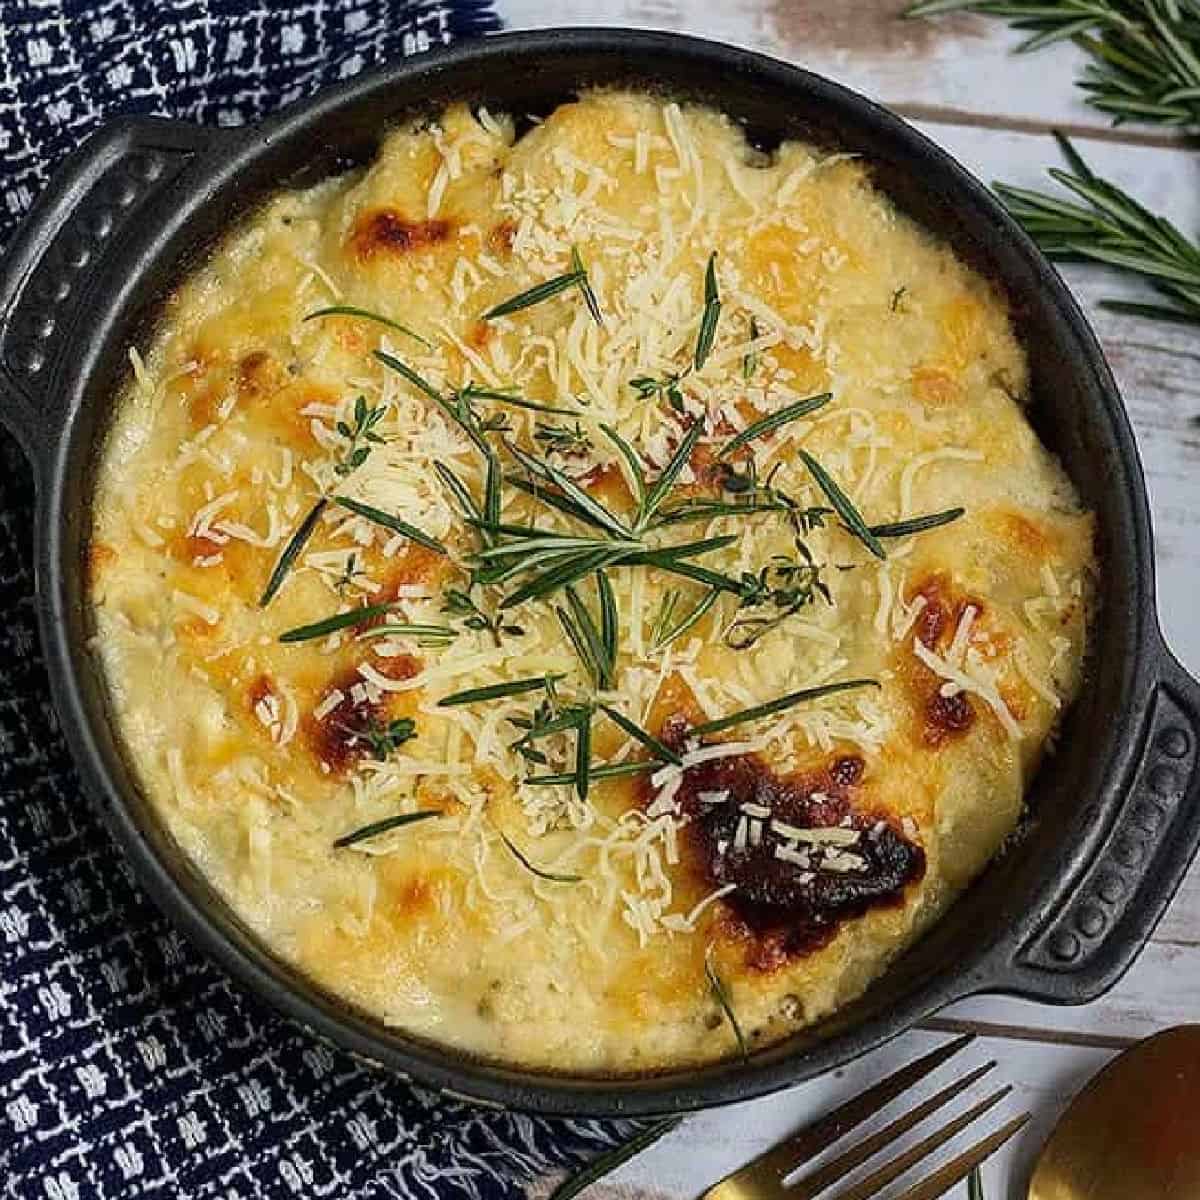 This cheesy scalloped potatoes recipe is a keeper. It's rich and creamy, with so much flavor and makes any meal so much better!
